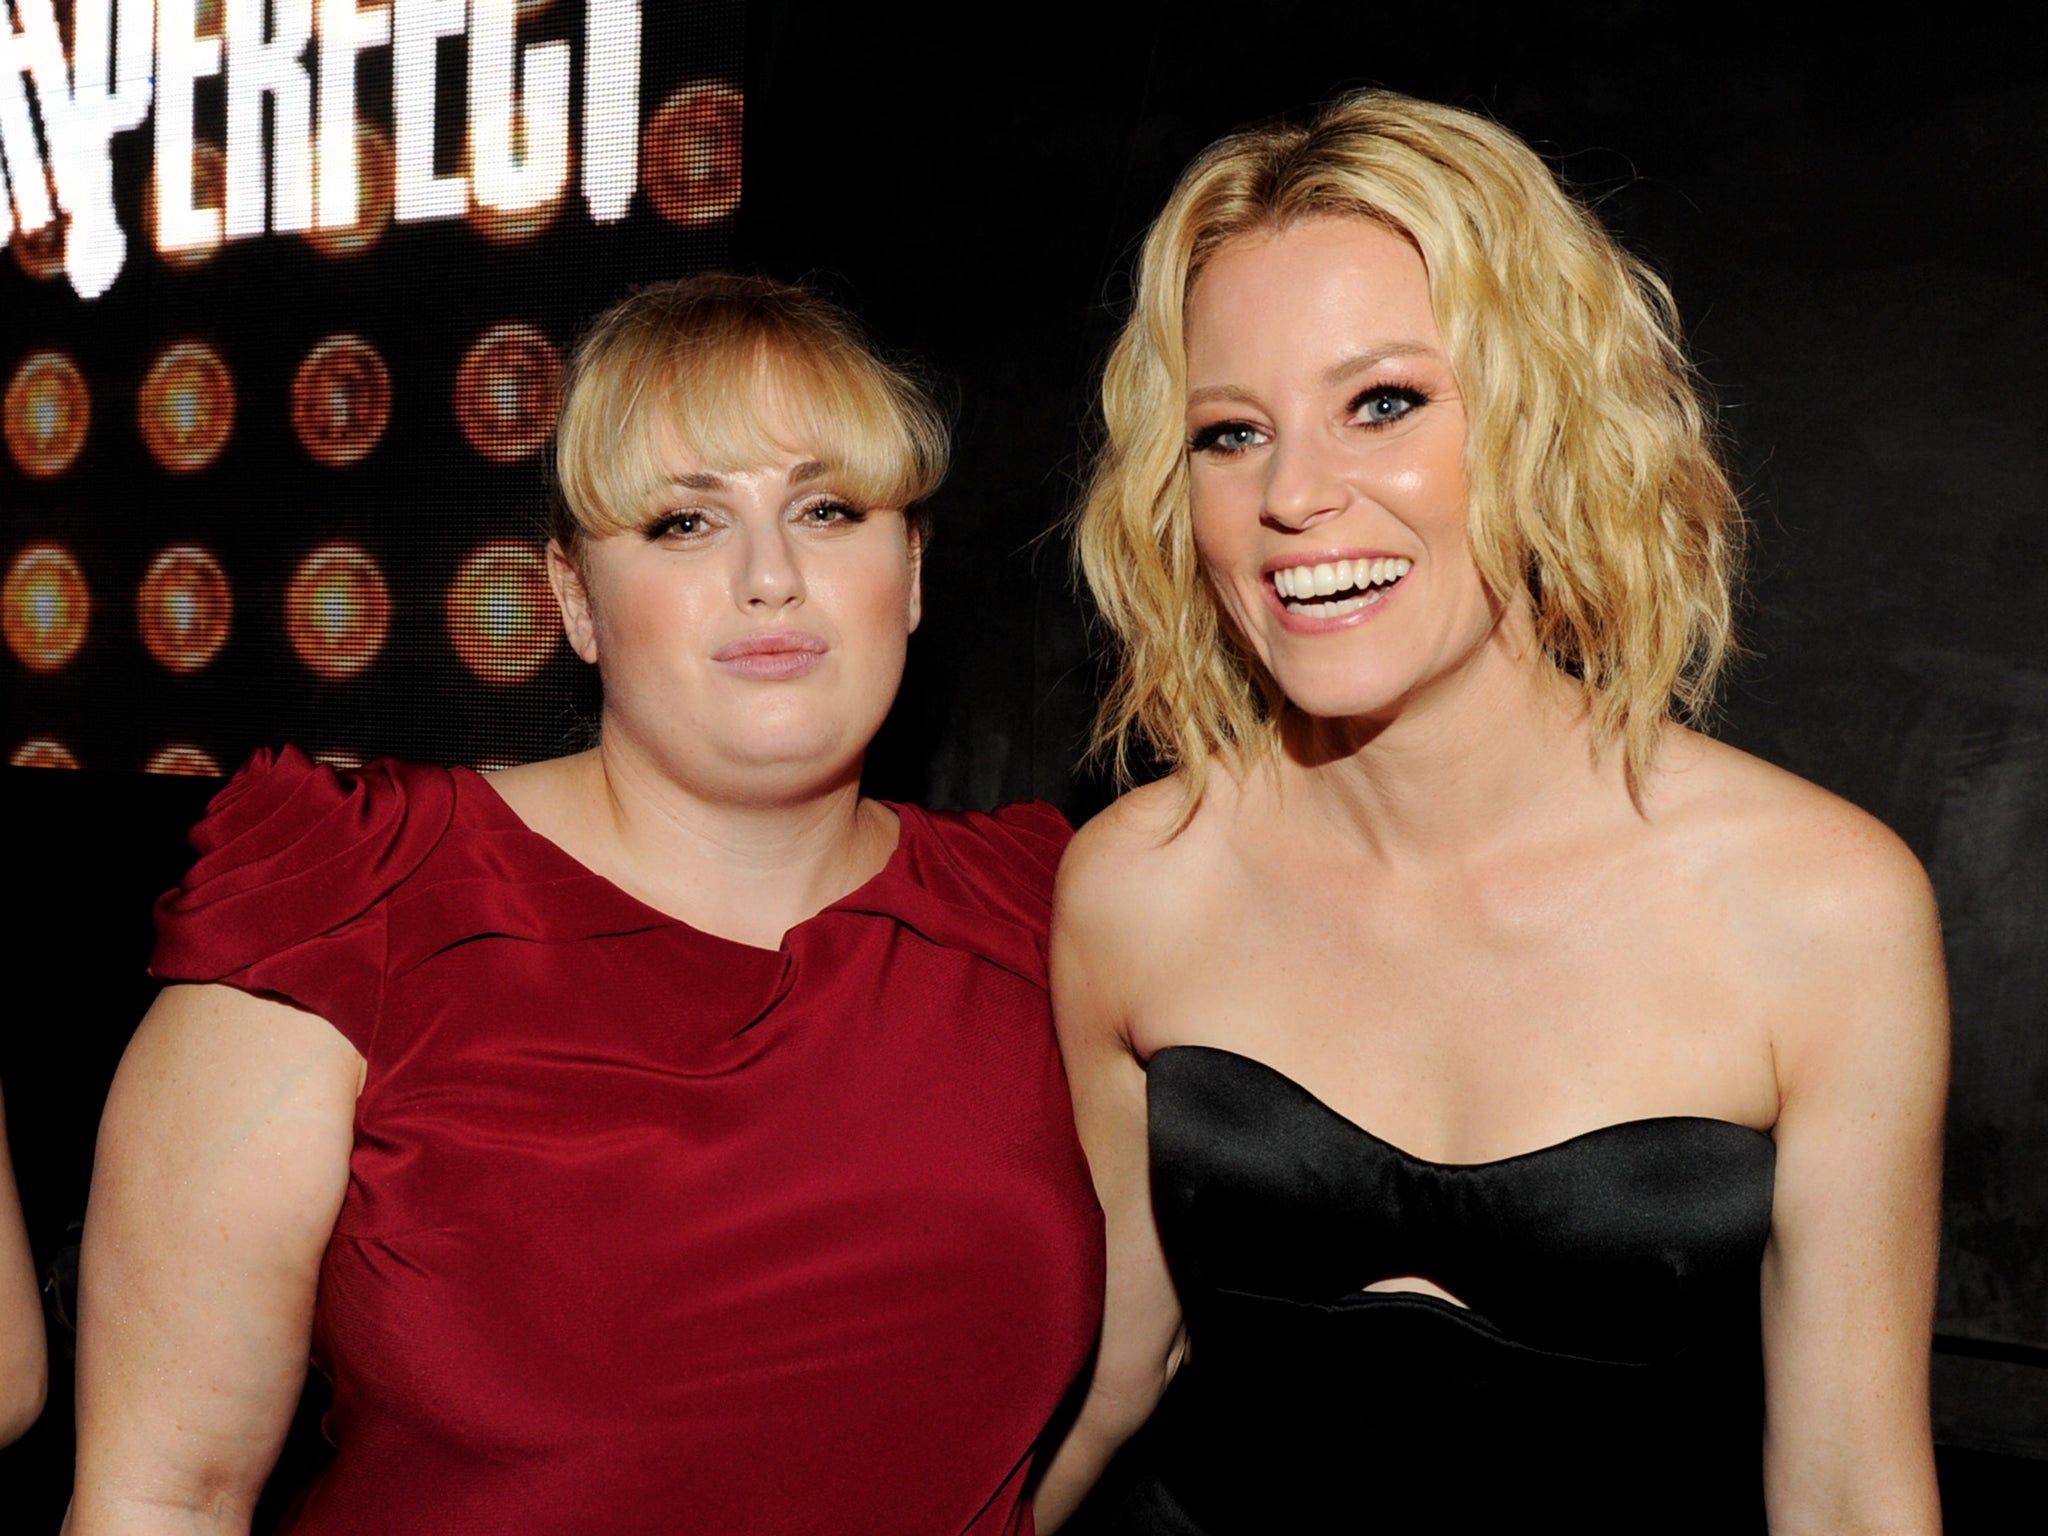 Elizabeth Banks and Rebel Wilson at the first Pitch Perfect premiere Kevin Winter/Getty